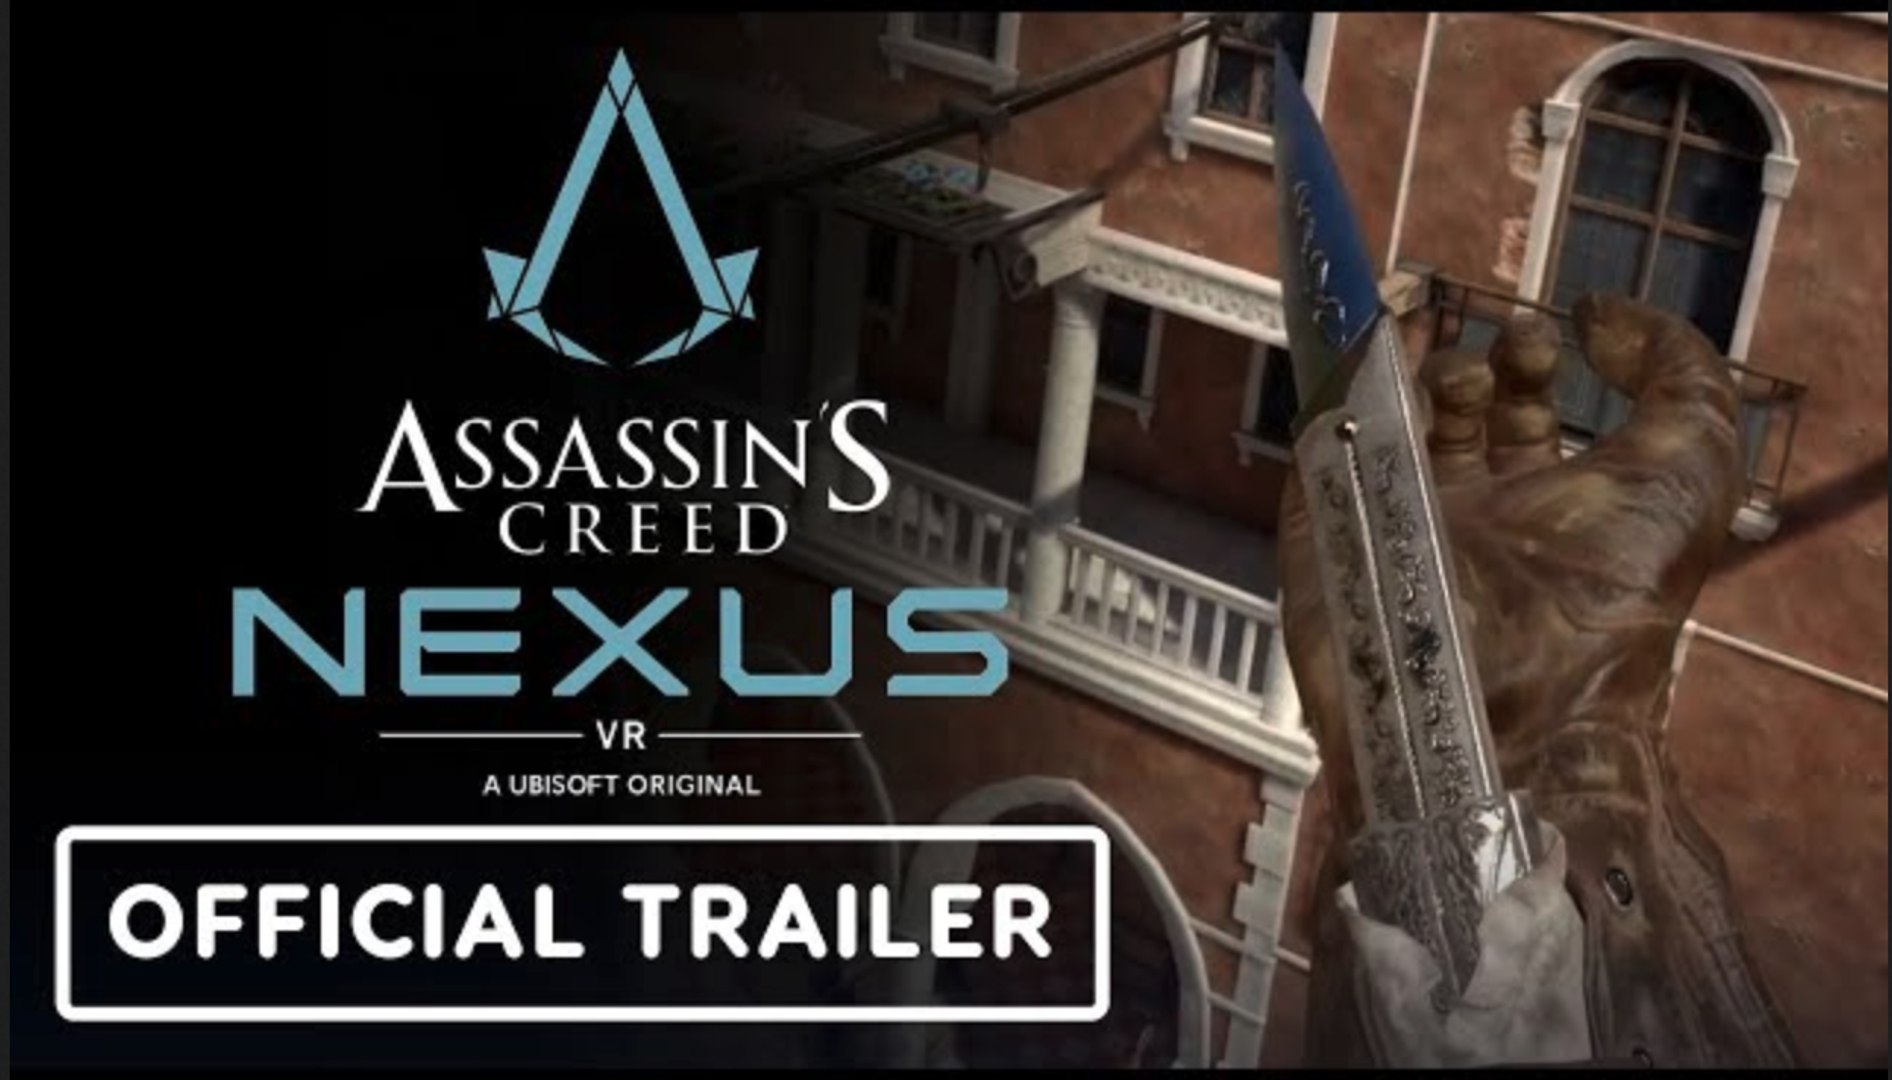 Assassin's Creed Nexus VR Launches on November 16